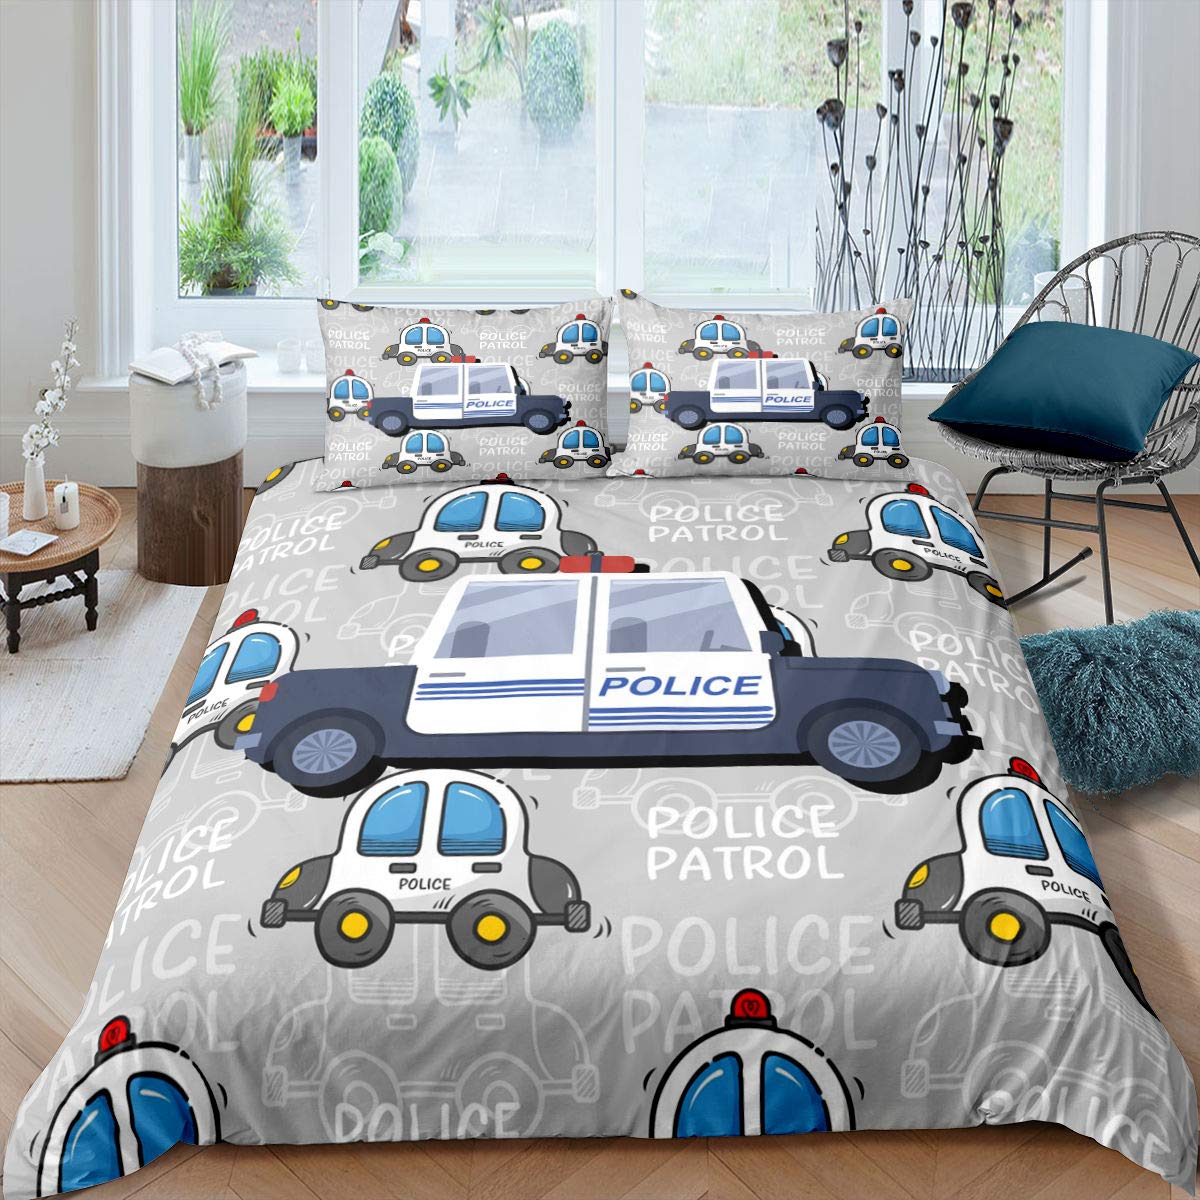 Police duvet cover 1 person